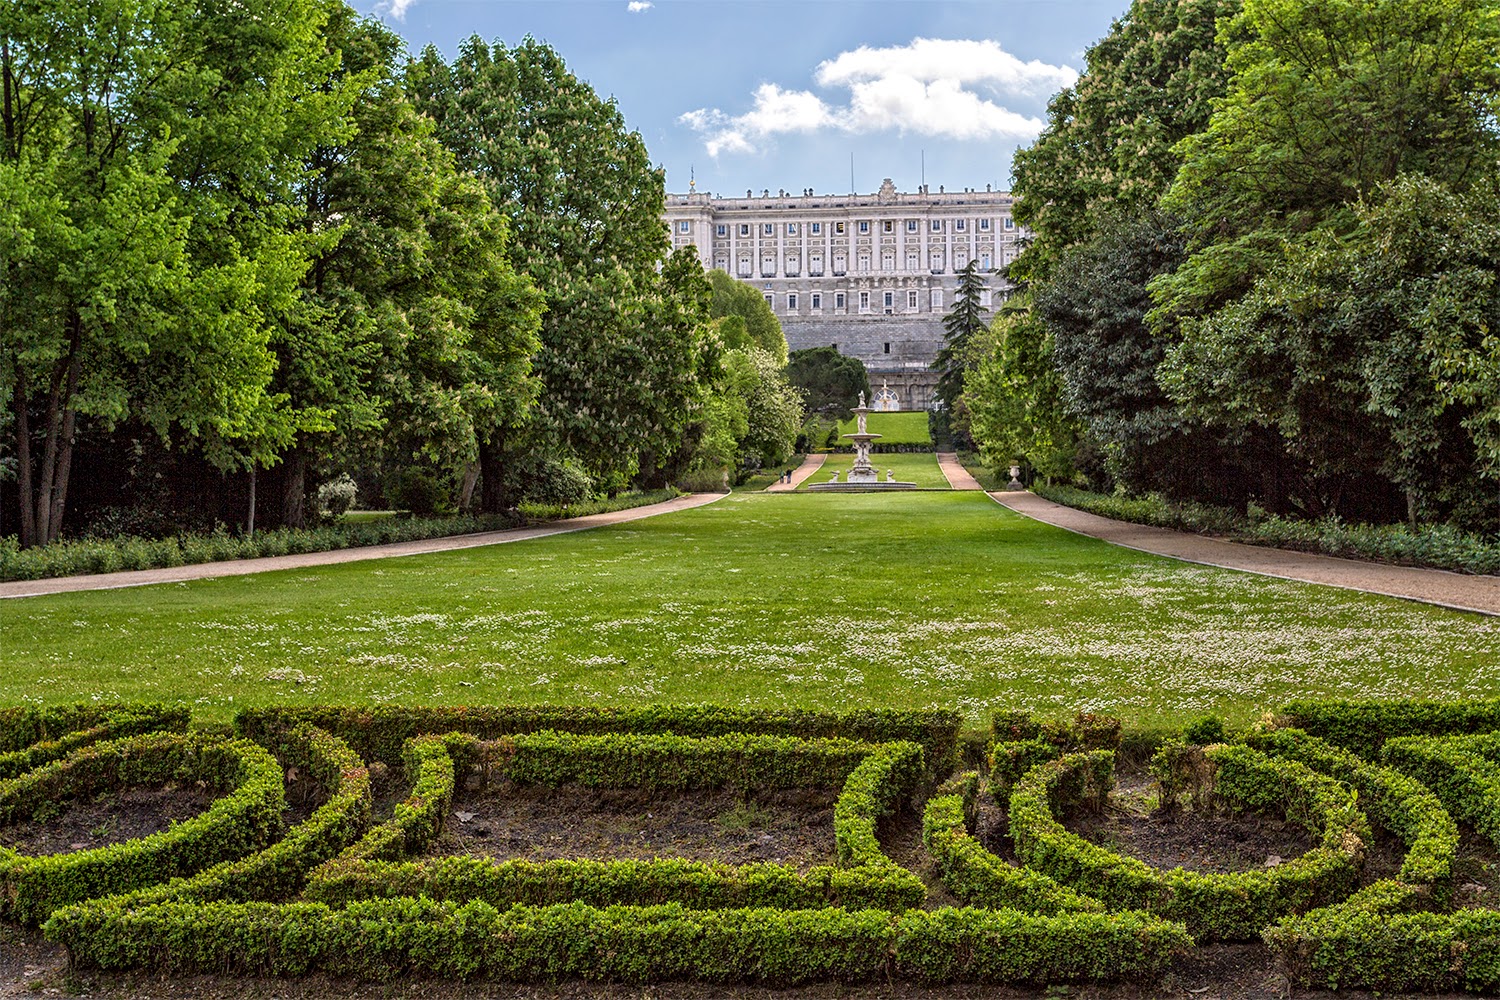 Campo del Moro - What to see in madrid